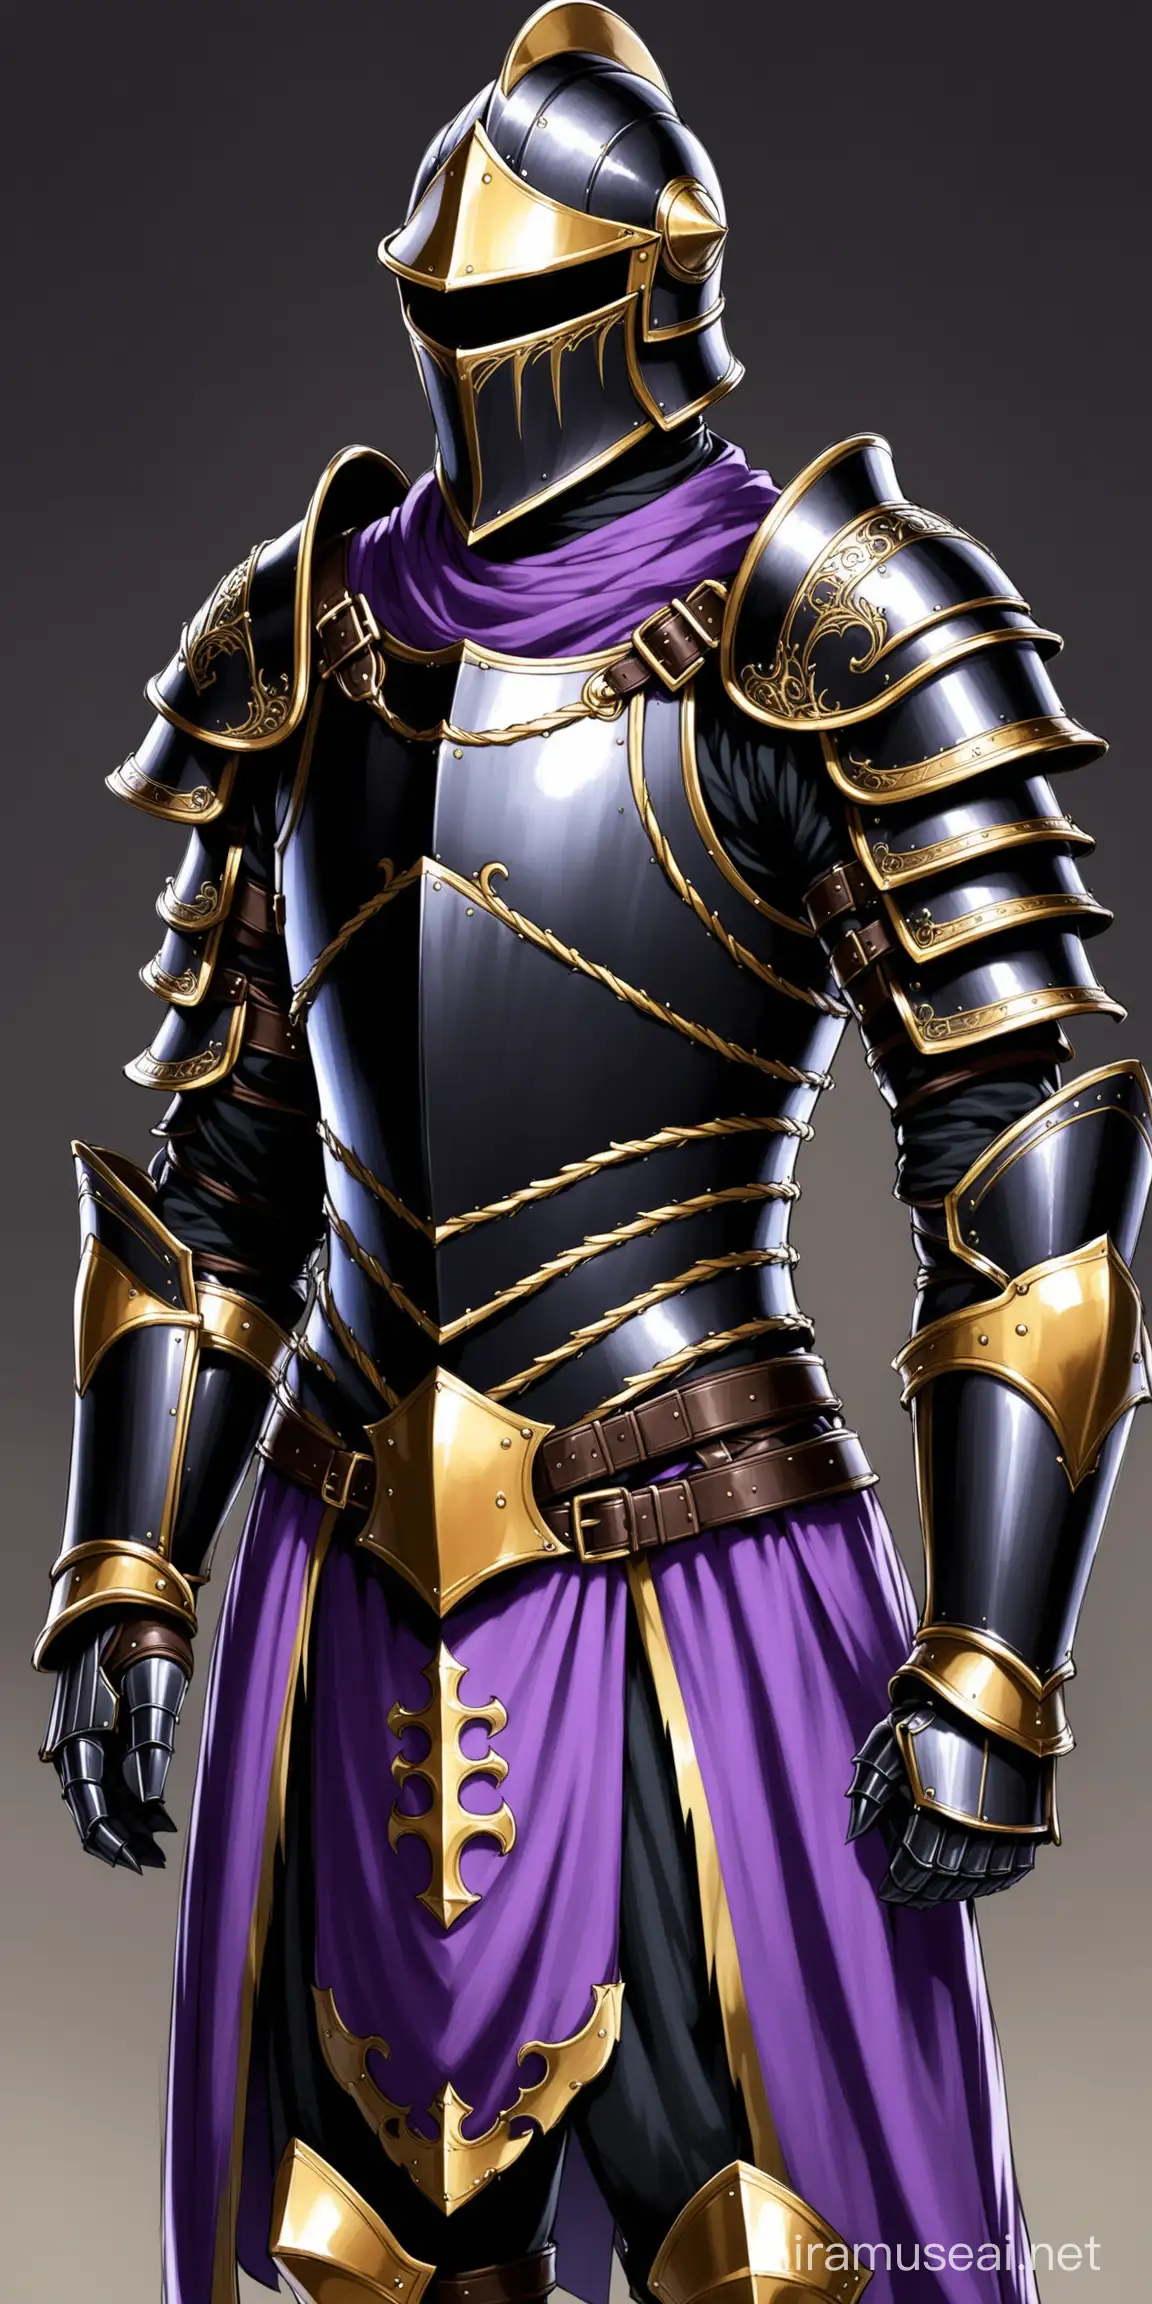 medieval obsidian knight armor, male, gold, purple, helmet, fabric accents, leather straps